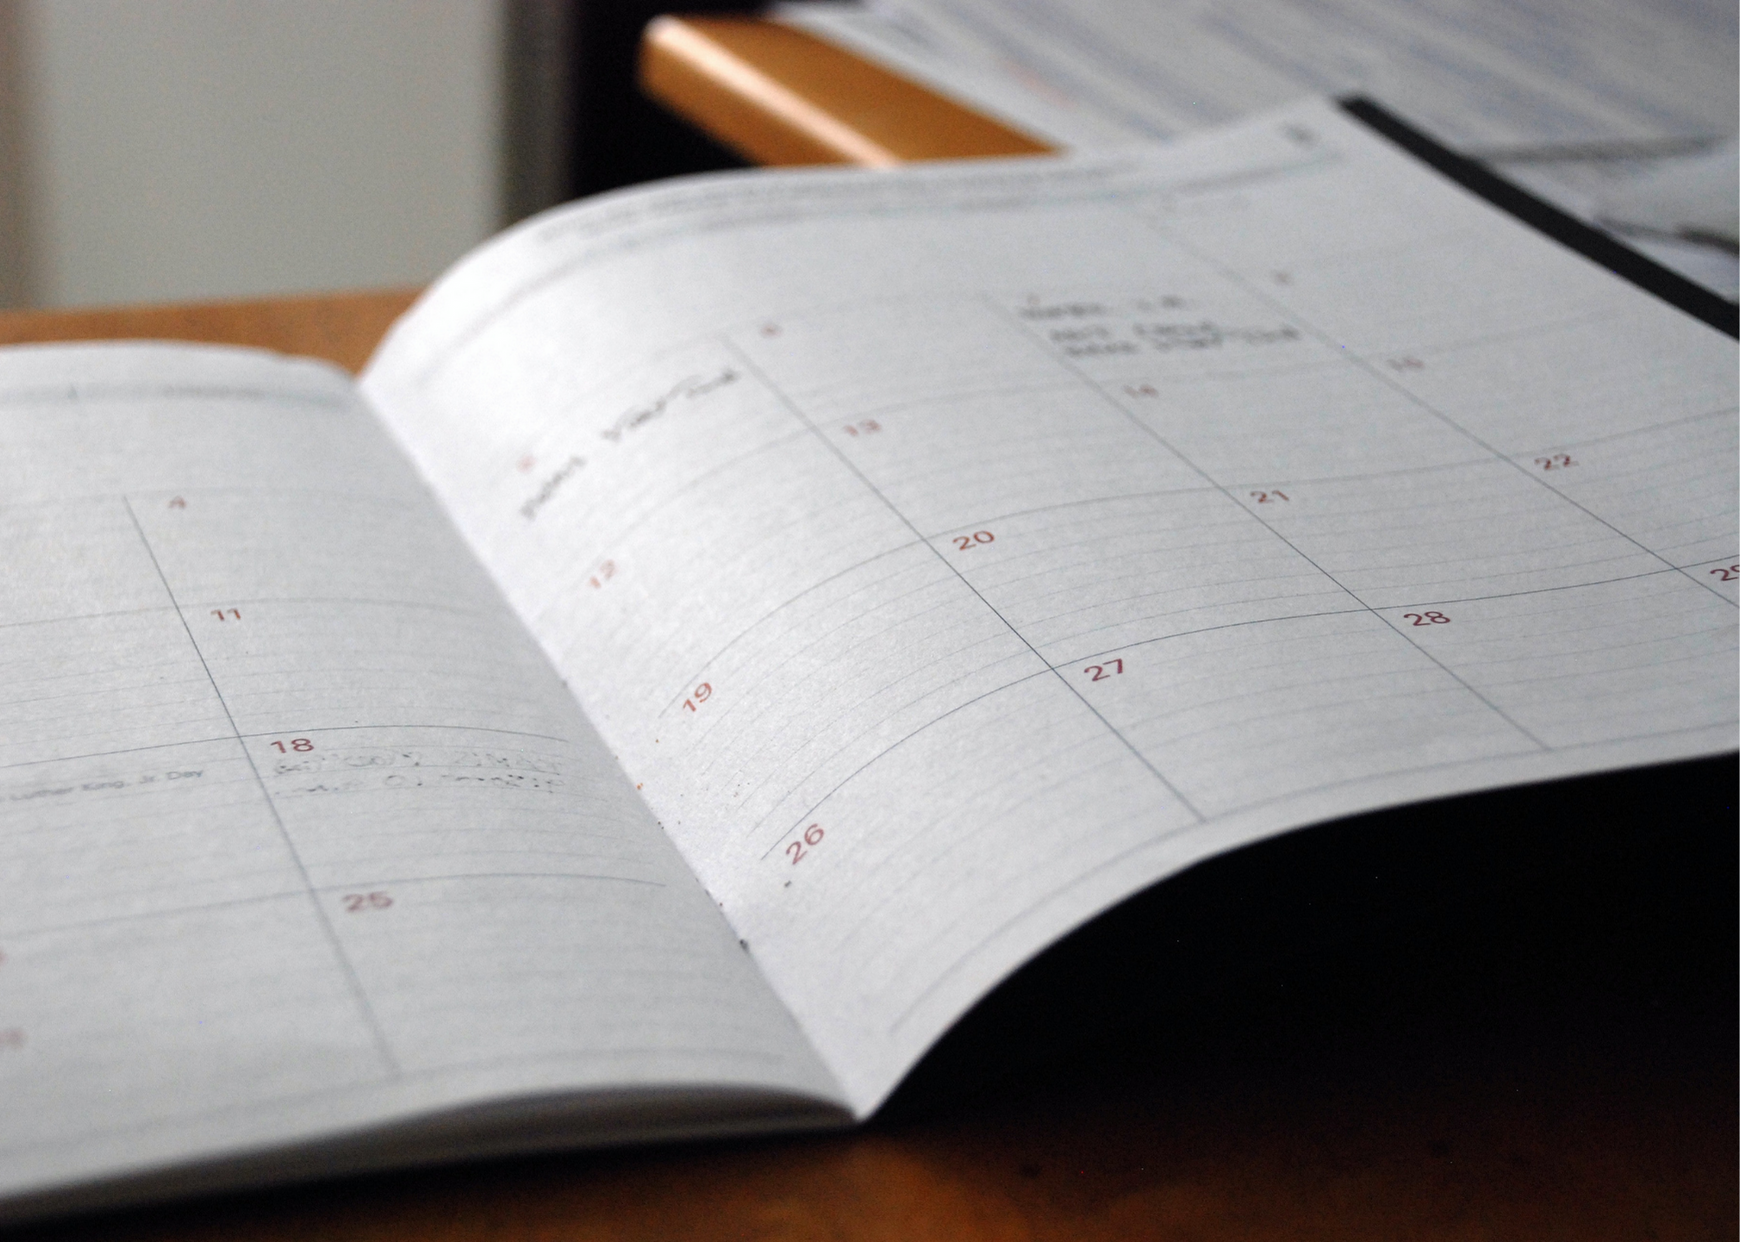 Want more work life balance? Use a family calendar to lighten the load 